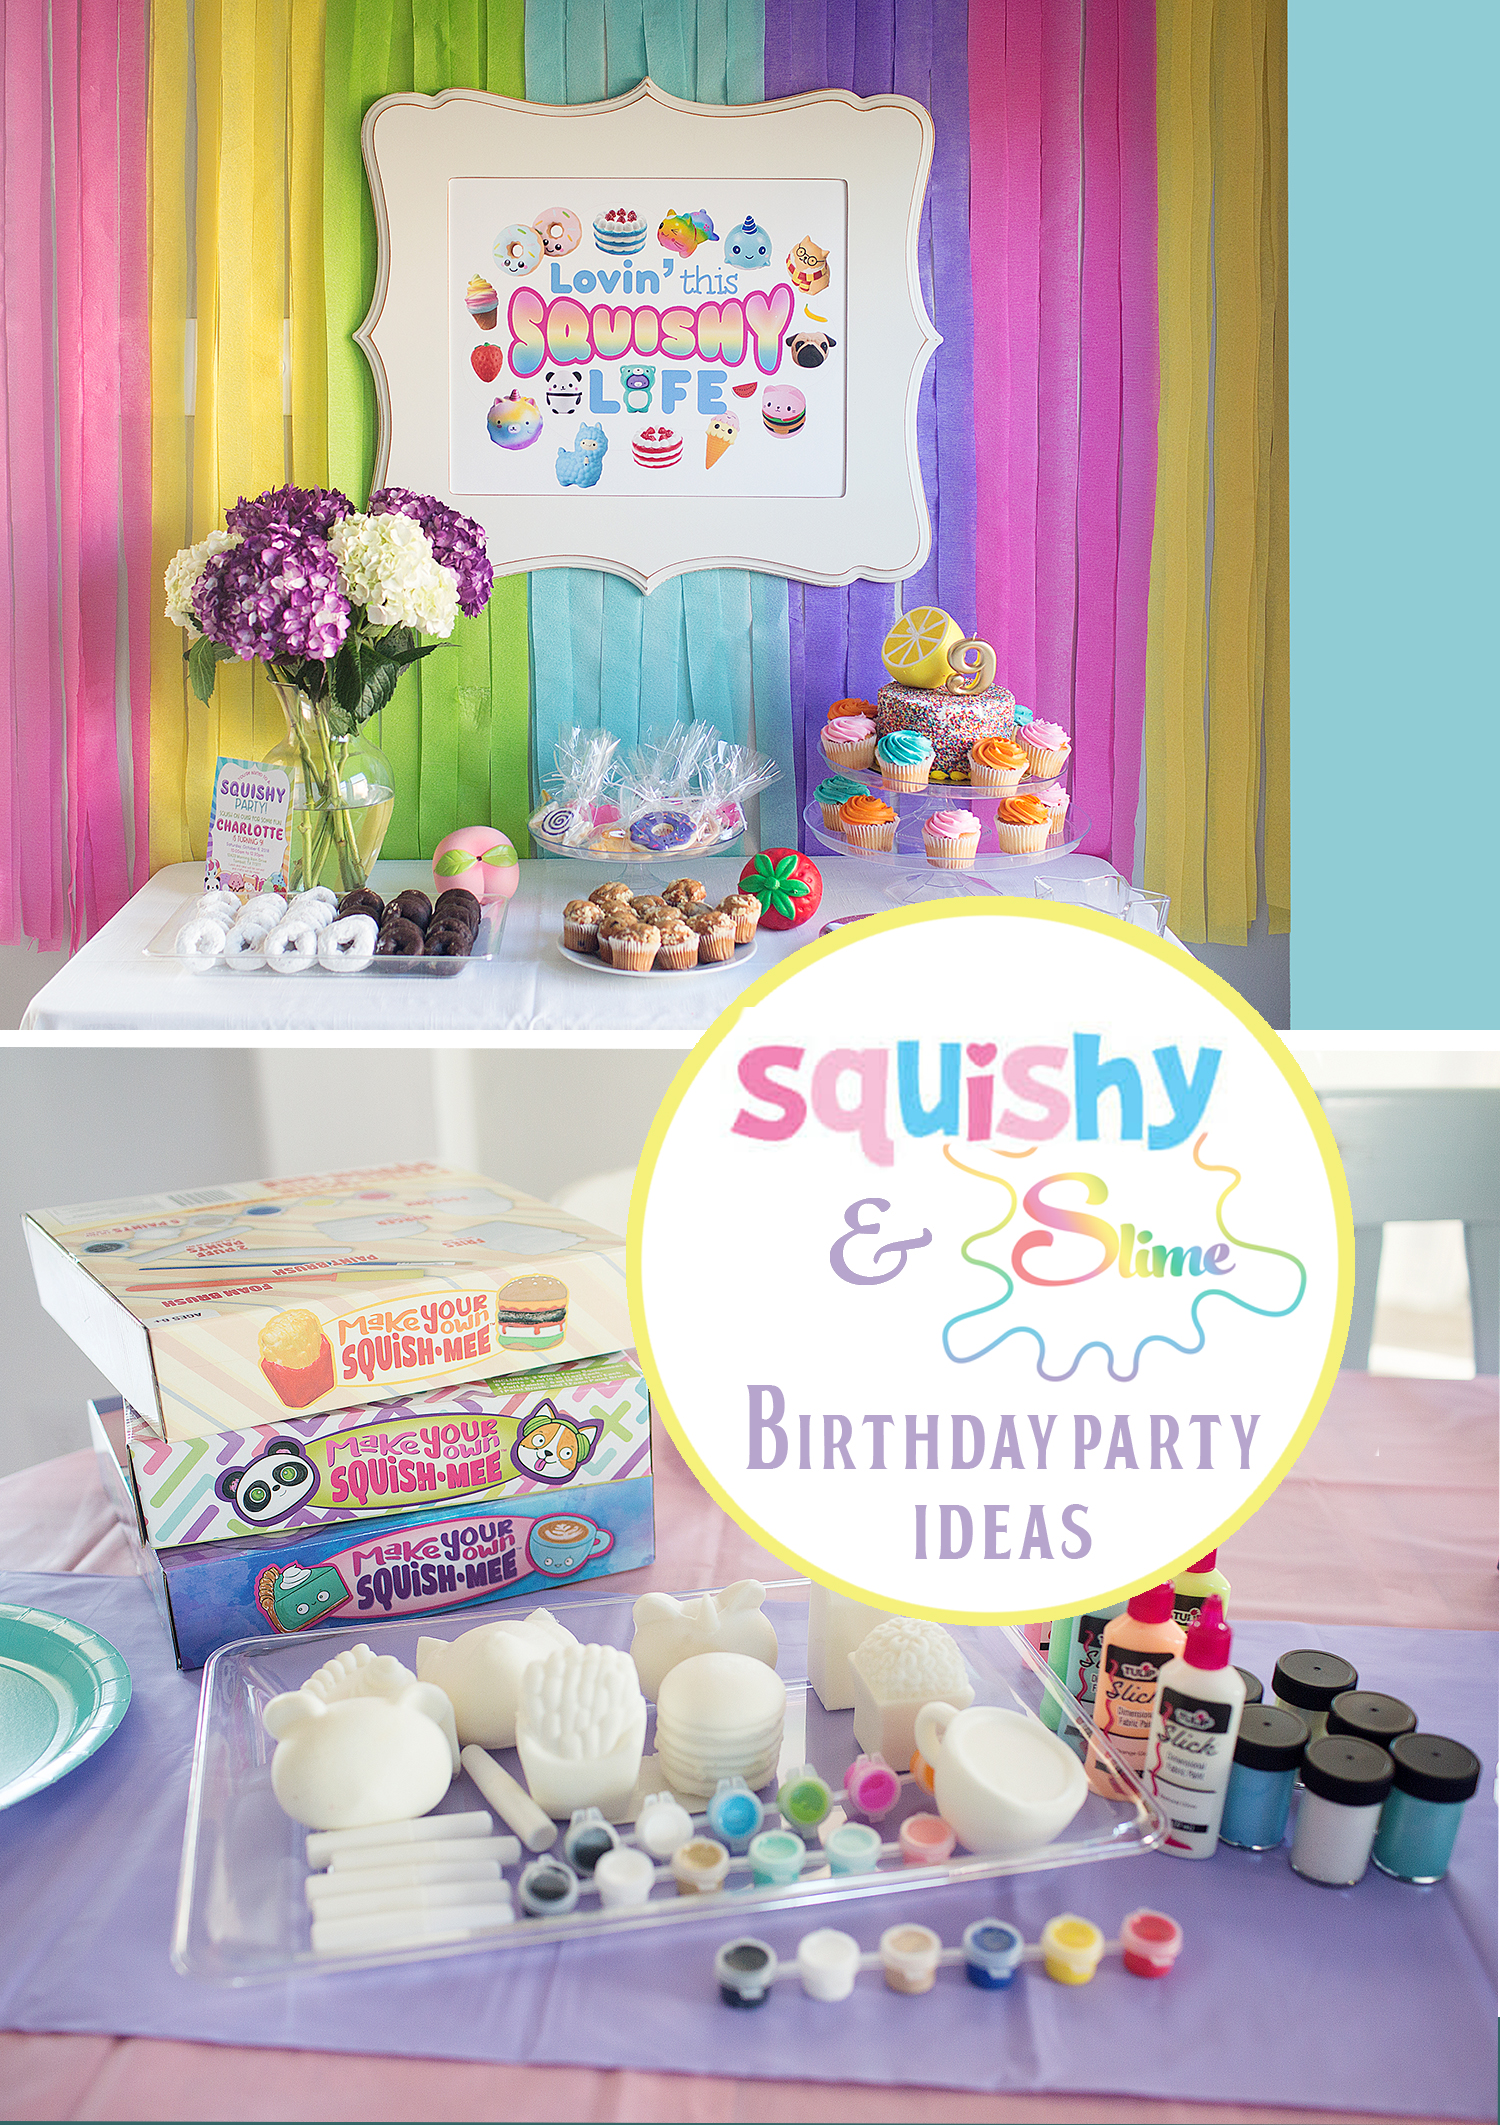 Slime Birthday Party Ideas, Photo 10 of 10